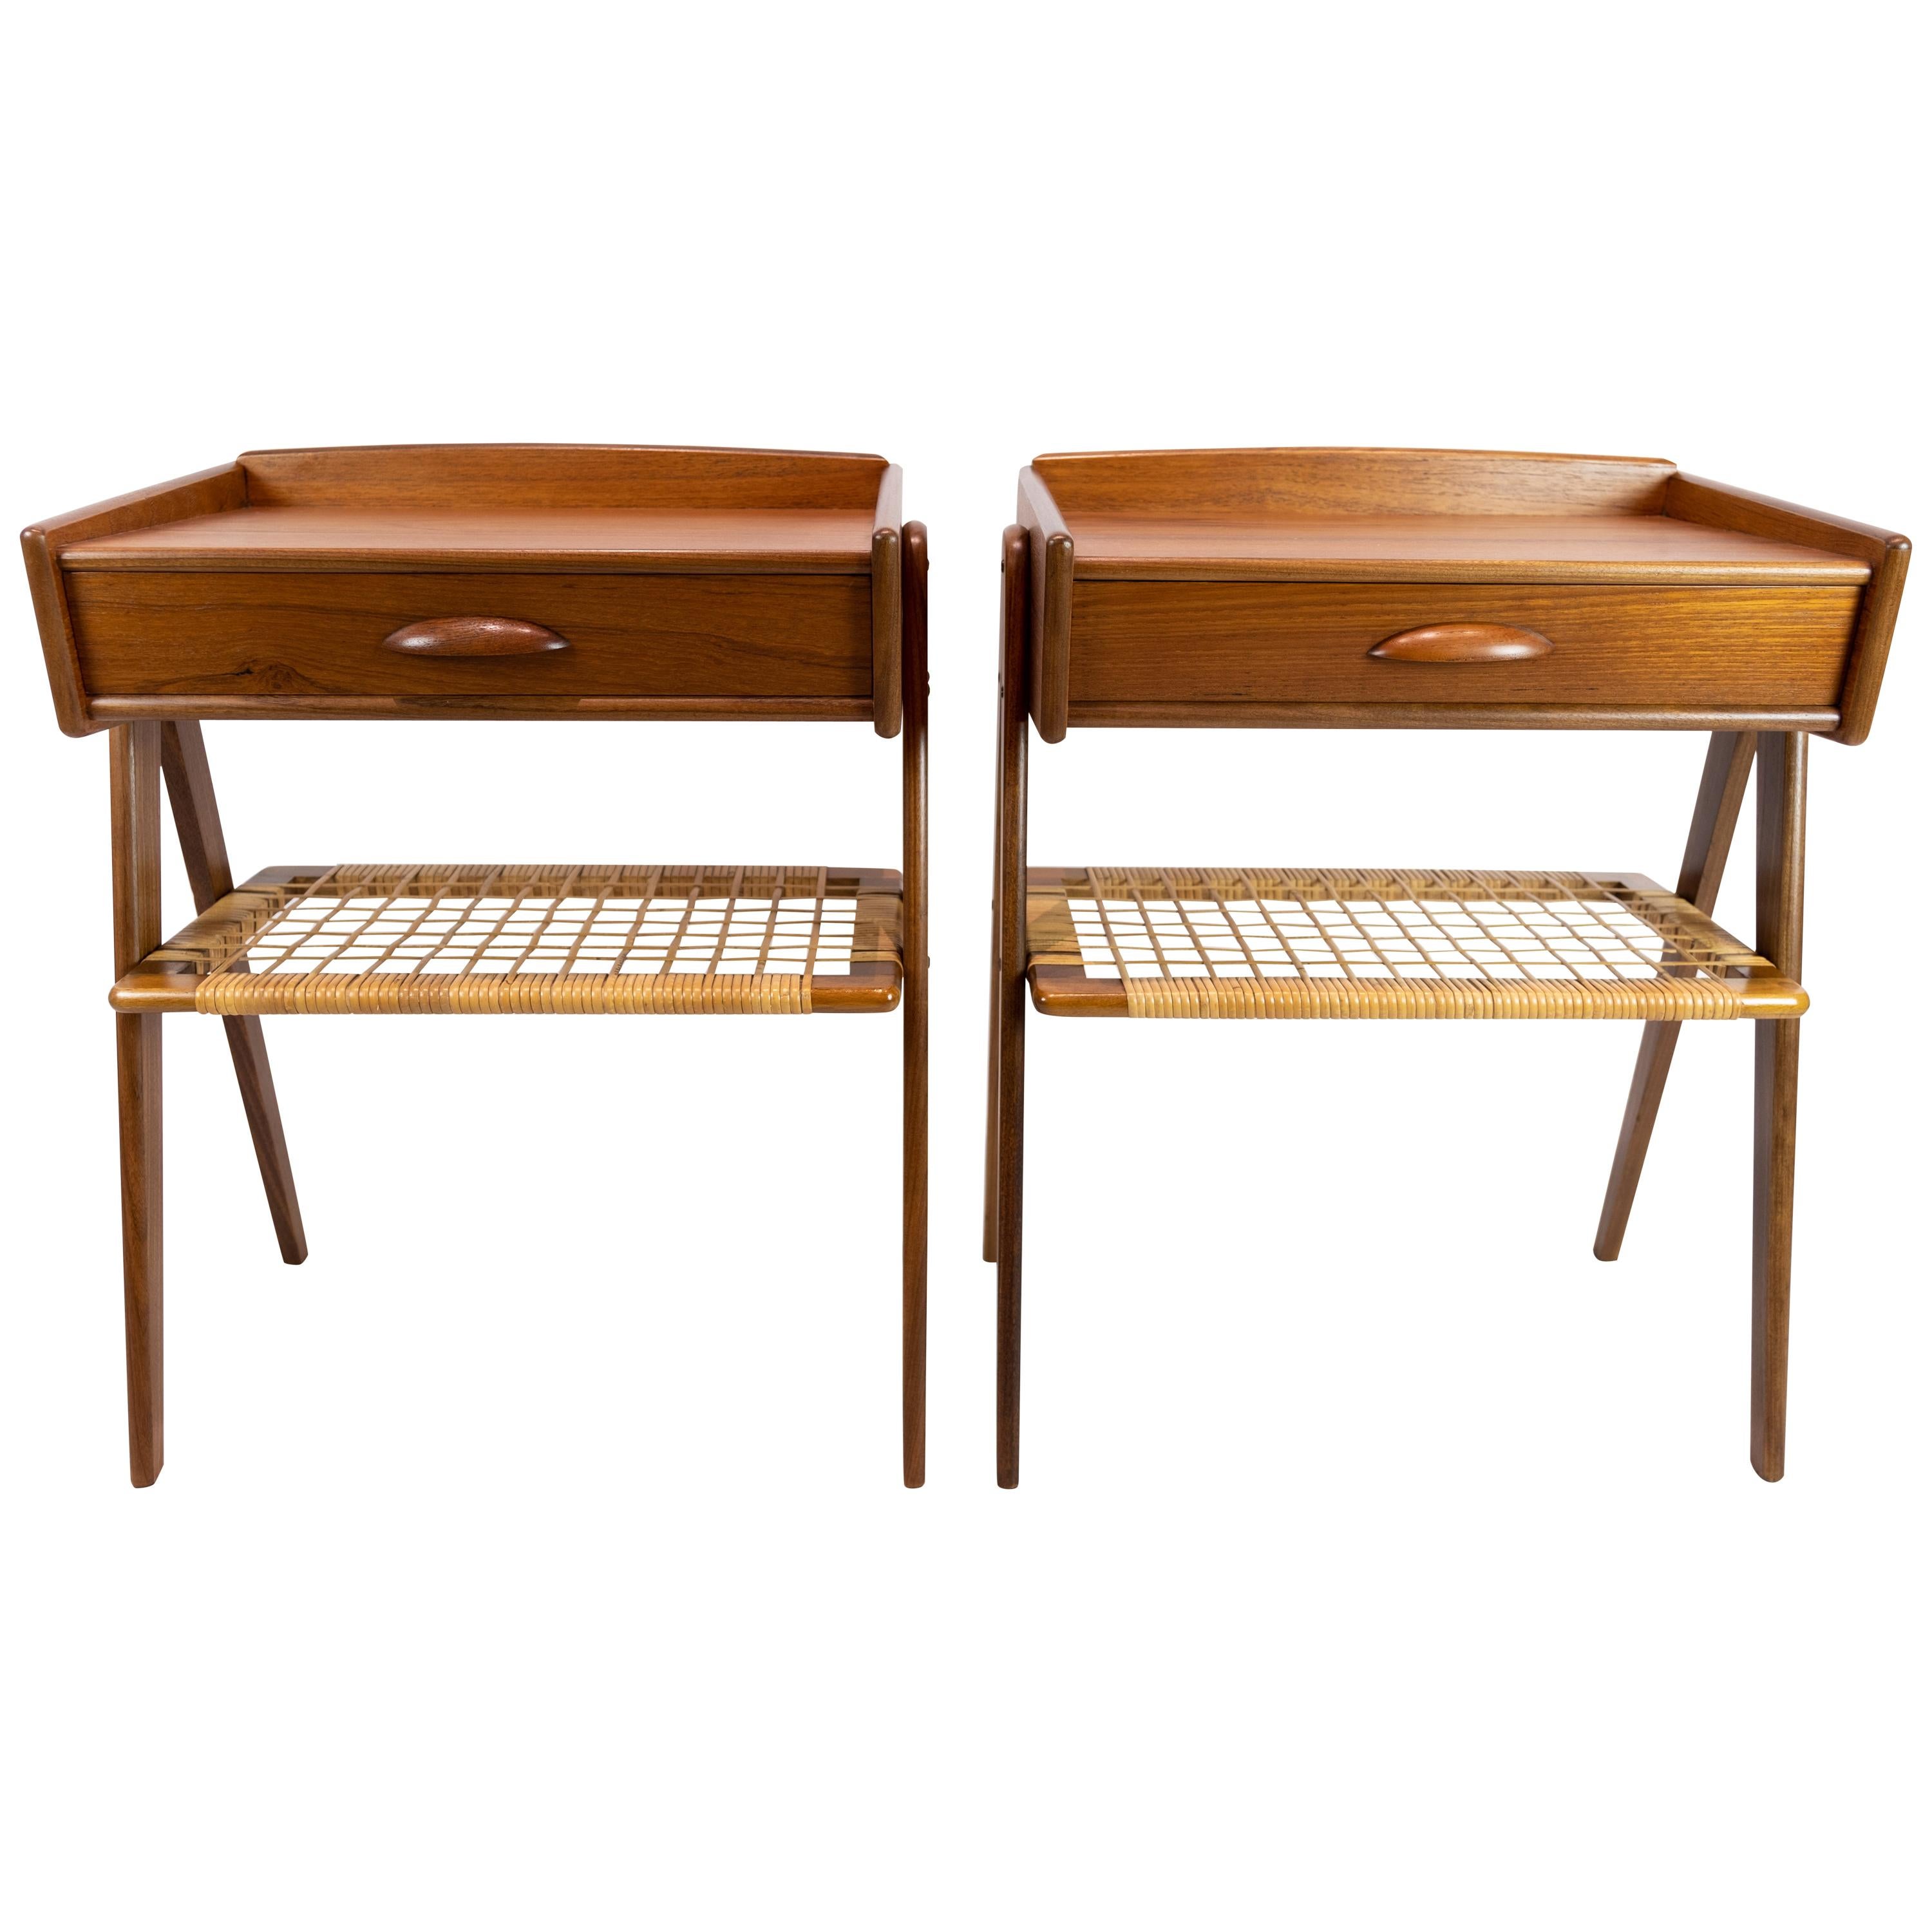 Pair of Side Tables in Teak with Paper Cord Shelf of Danish Design, 1960s